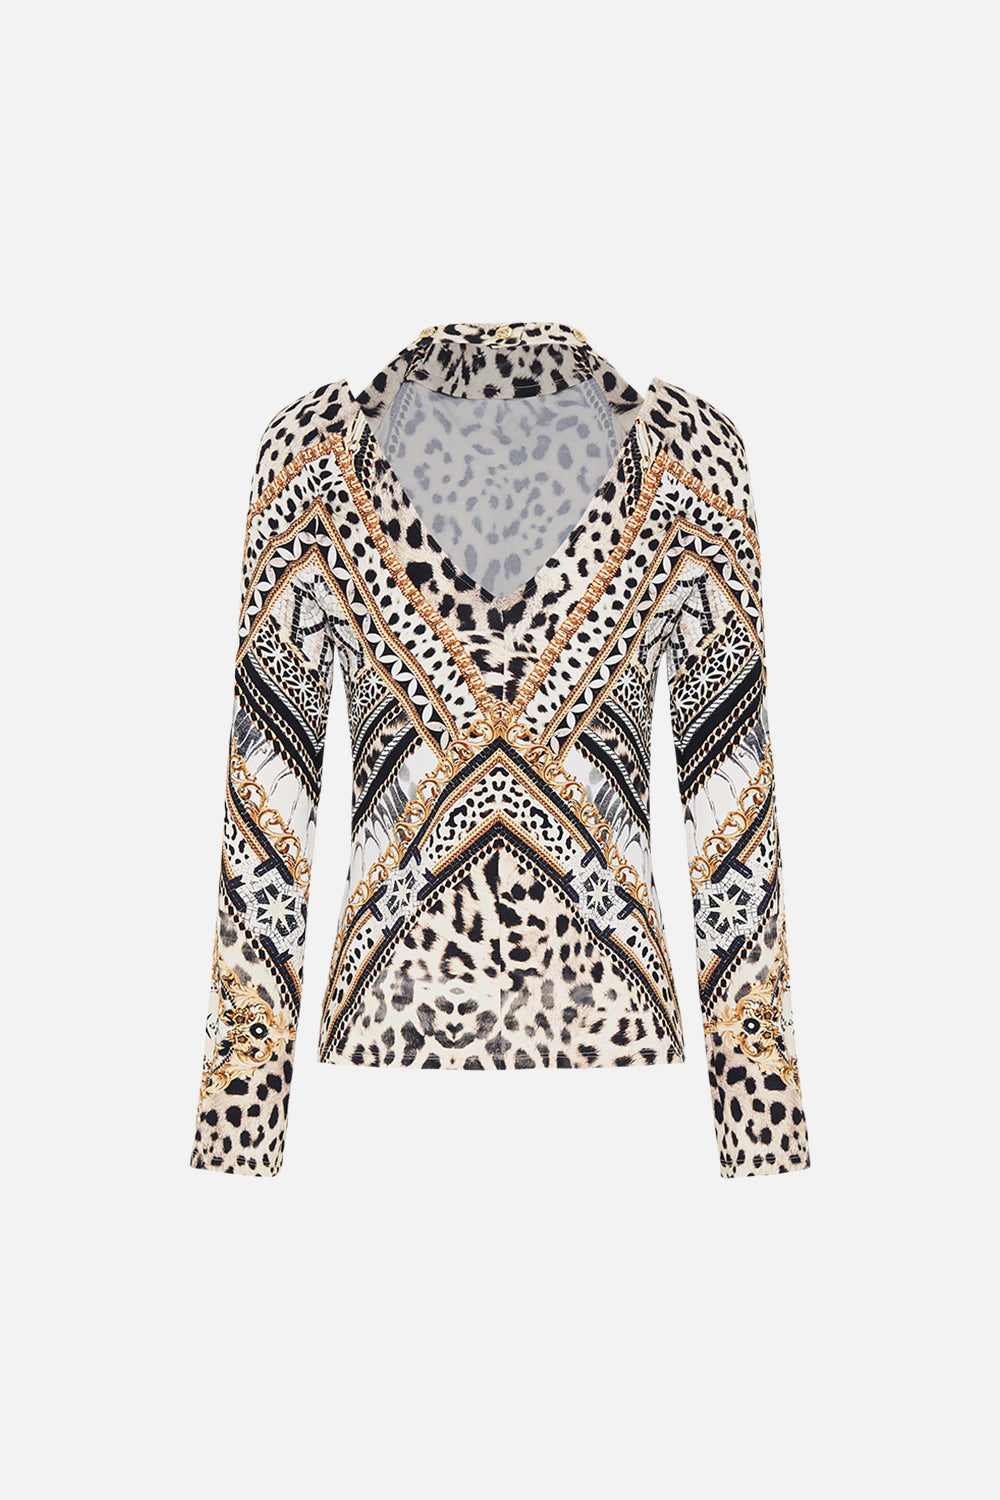 Back product view of CAMILLA animal print top in Mosaic Muse print